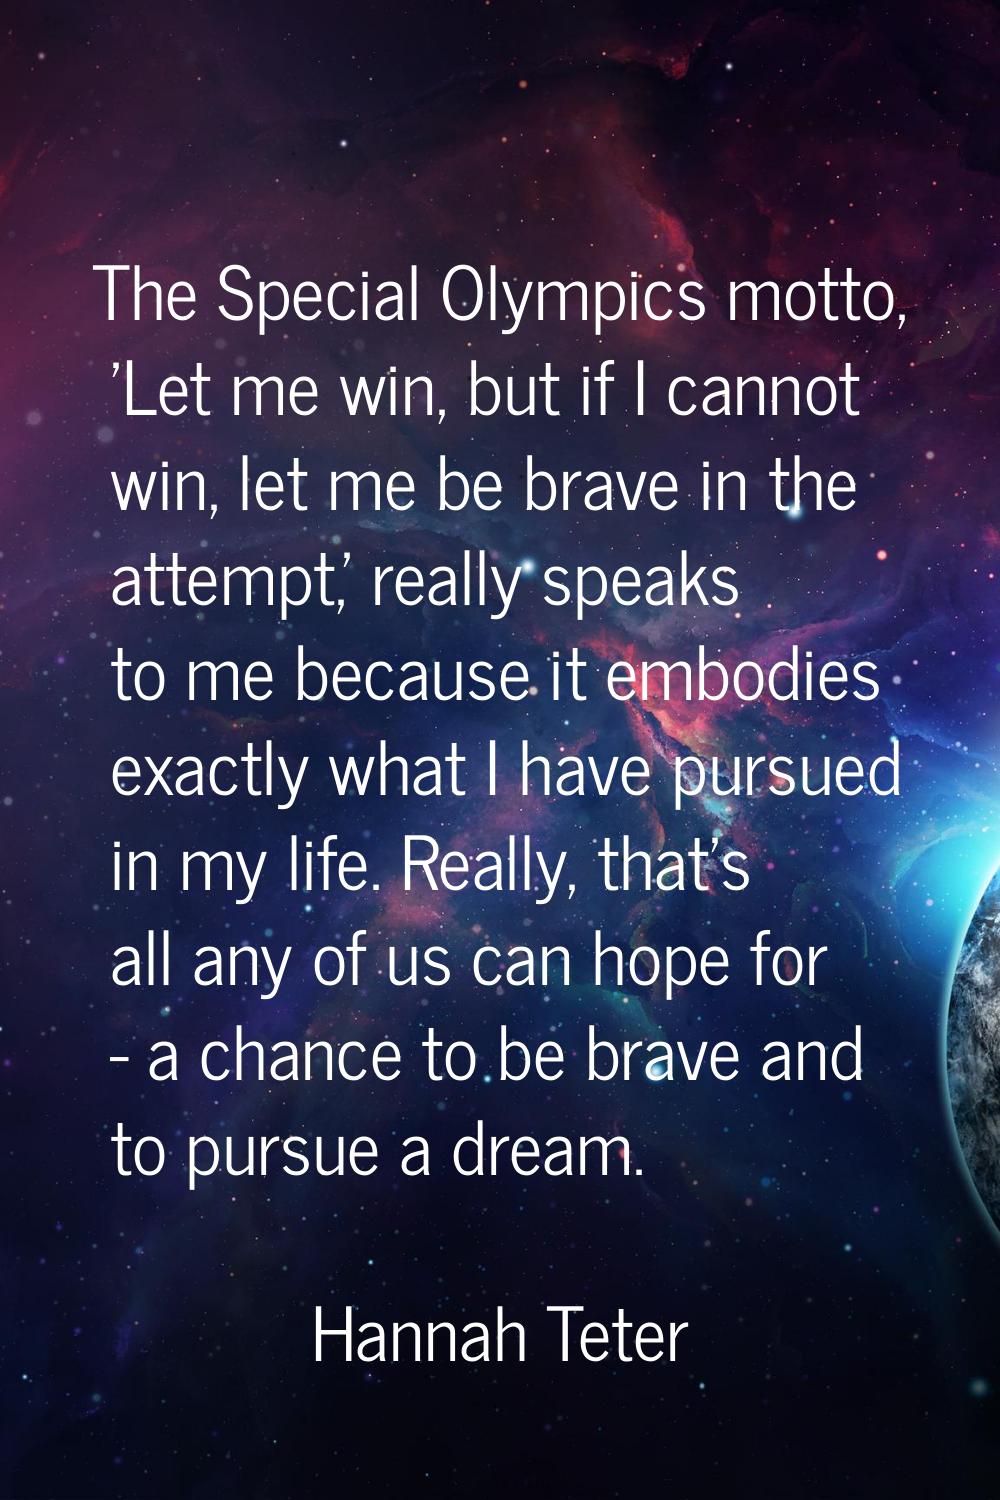 The Special Olympics motto, 'Let me win, but if I cannot win, let me be brave in the attempt,' real